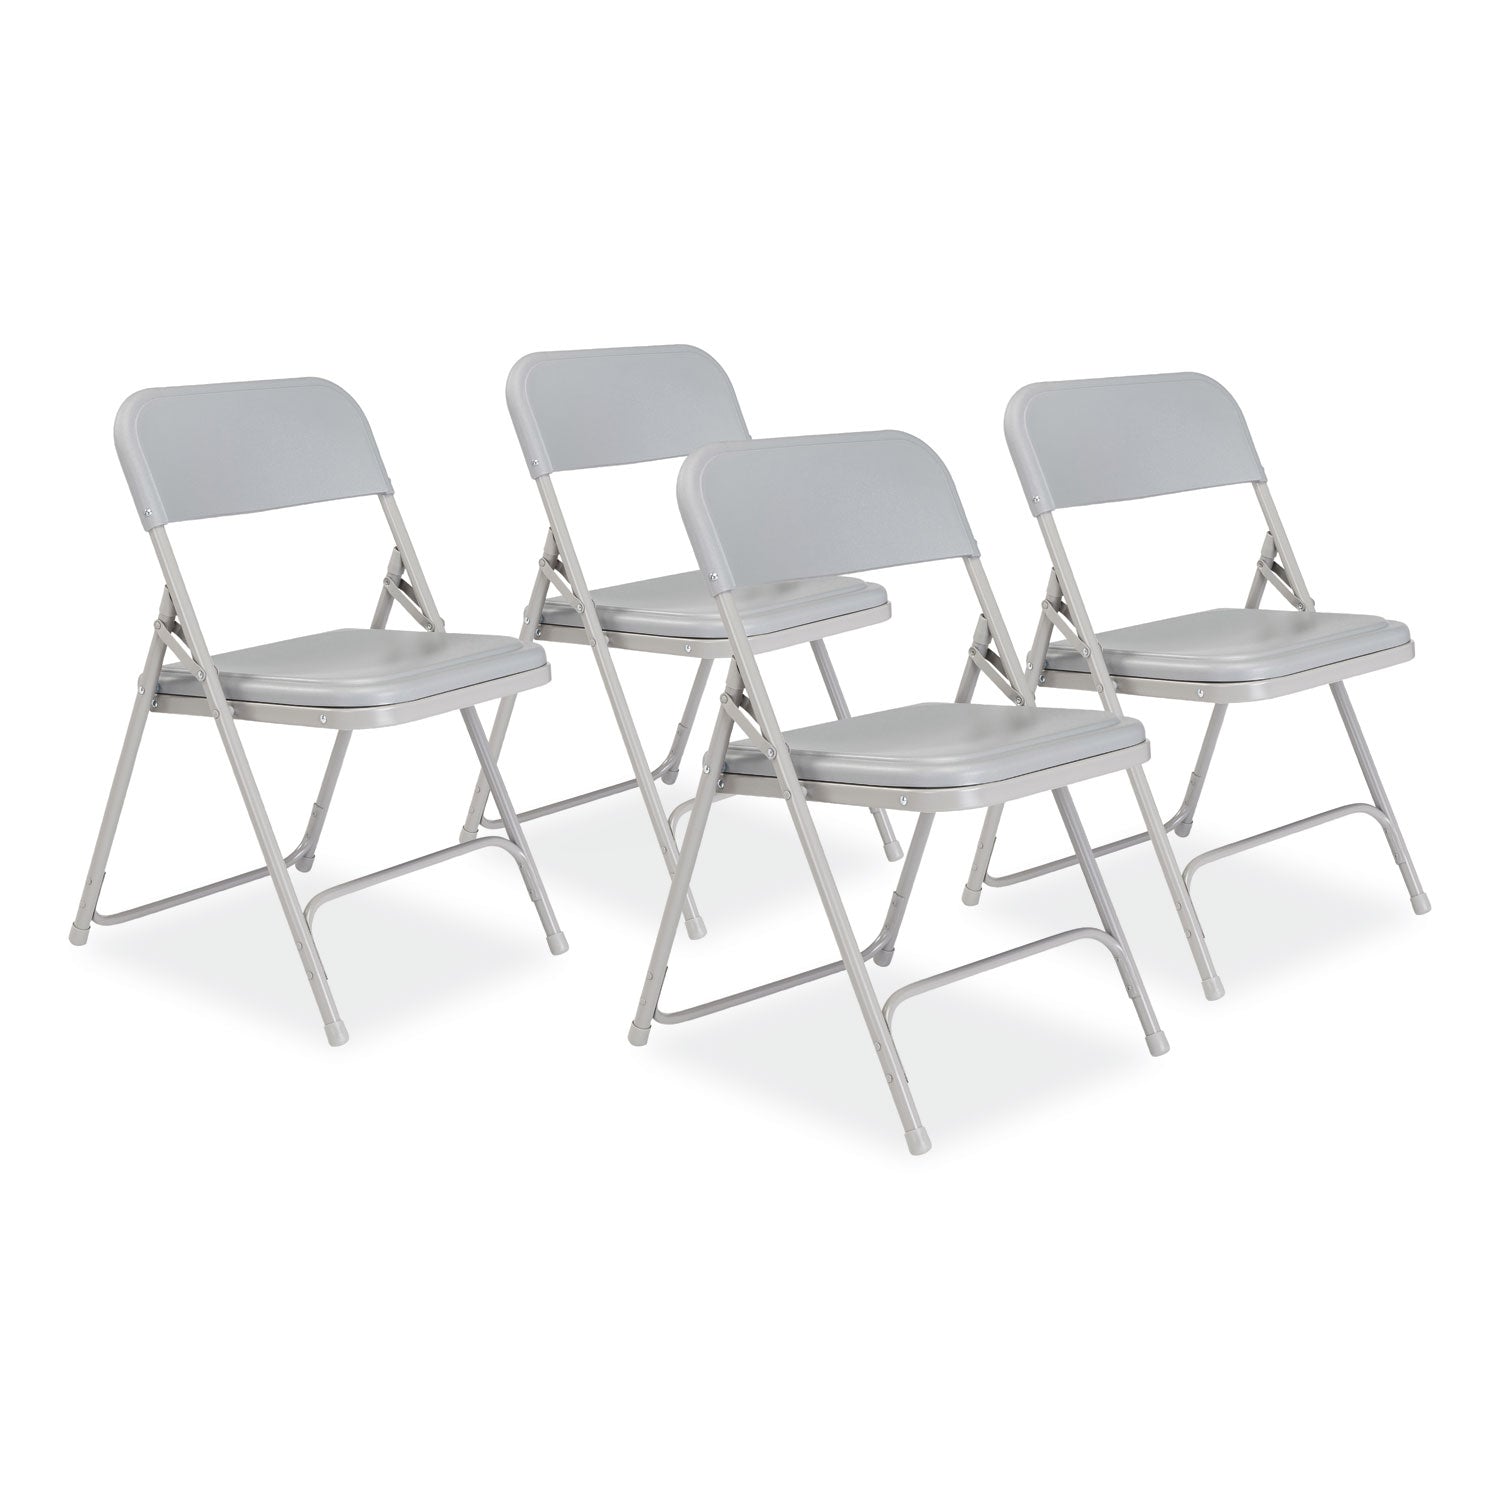 800-series-premium-plastic-folding-chair-supports-500-lb-18-seat-ht-gray-seat-back-gray-base-4-ctships-in-1-3-bus-days_nps802 - 1